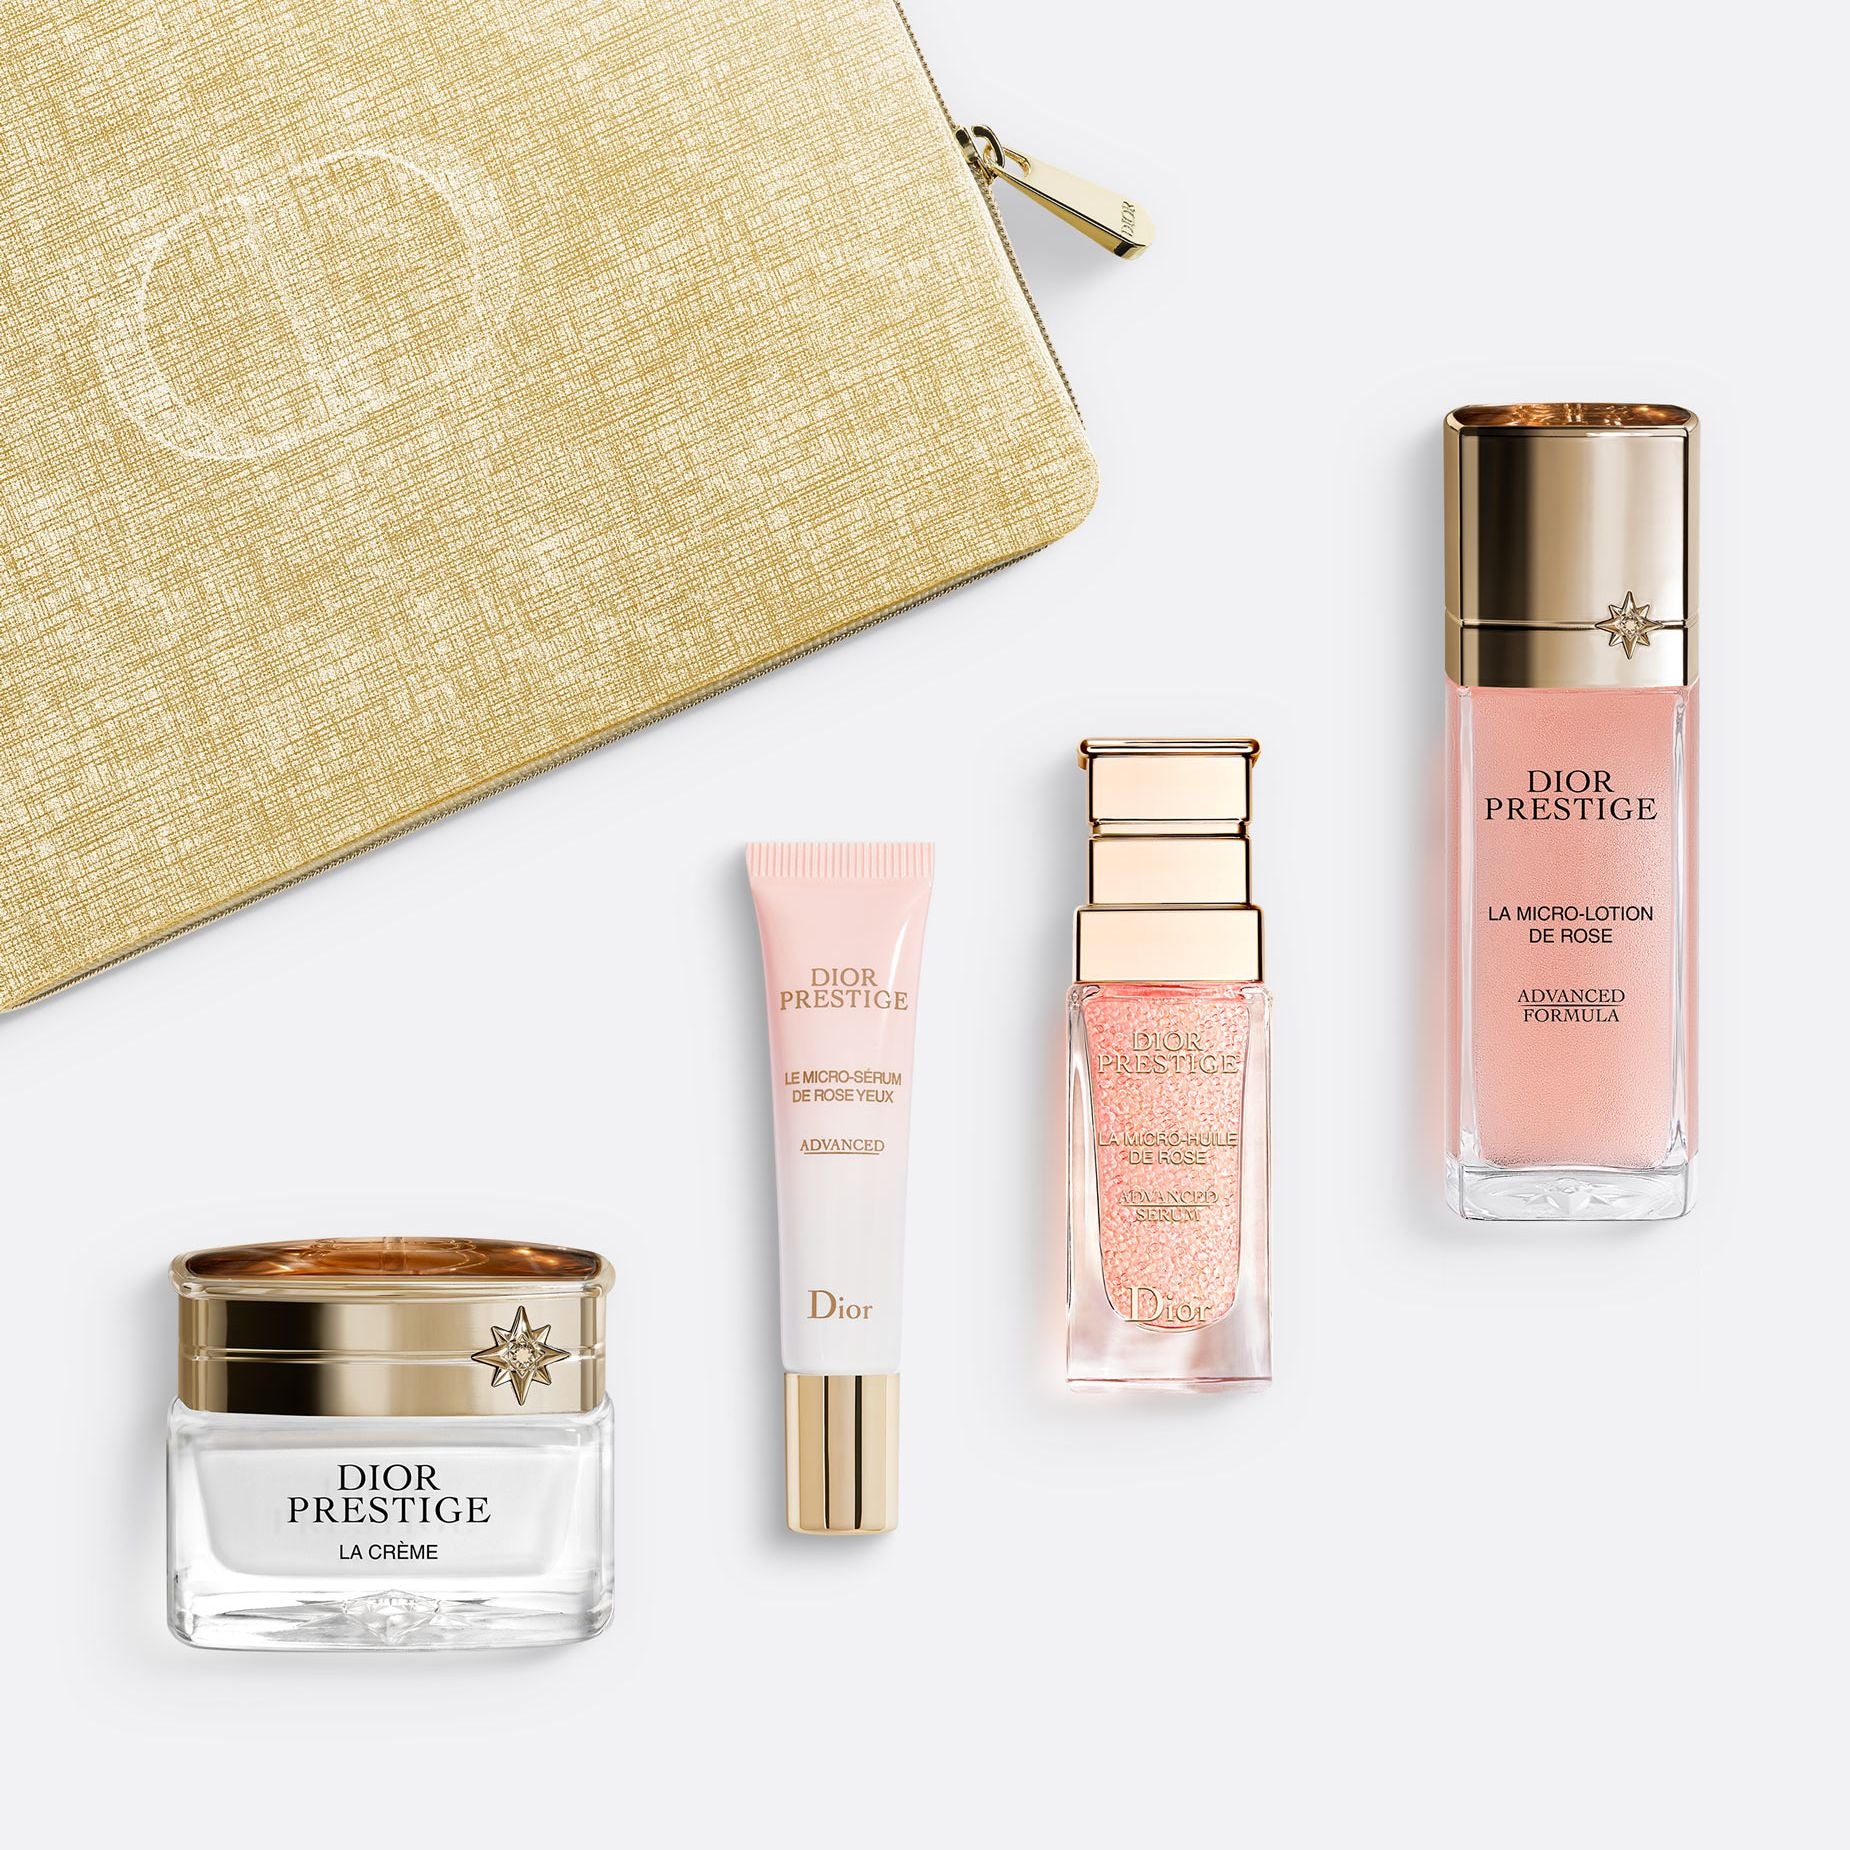 DIOR PRESTIGE DISCOVERY SET ~ The Regenerating and Perfecting Discovery Ritual - 4 Products